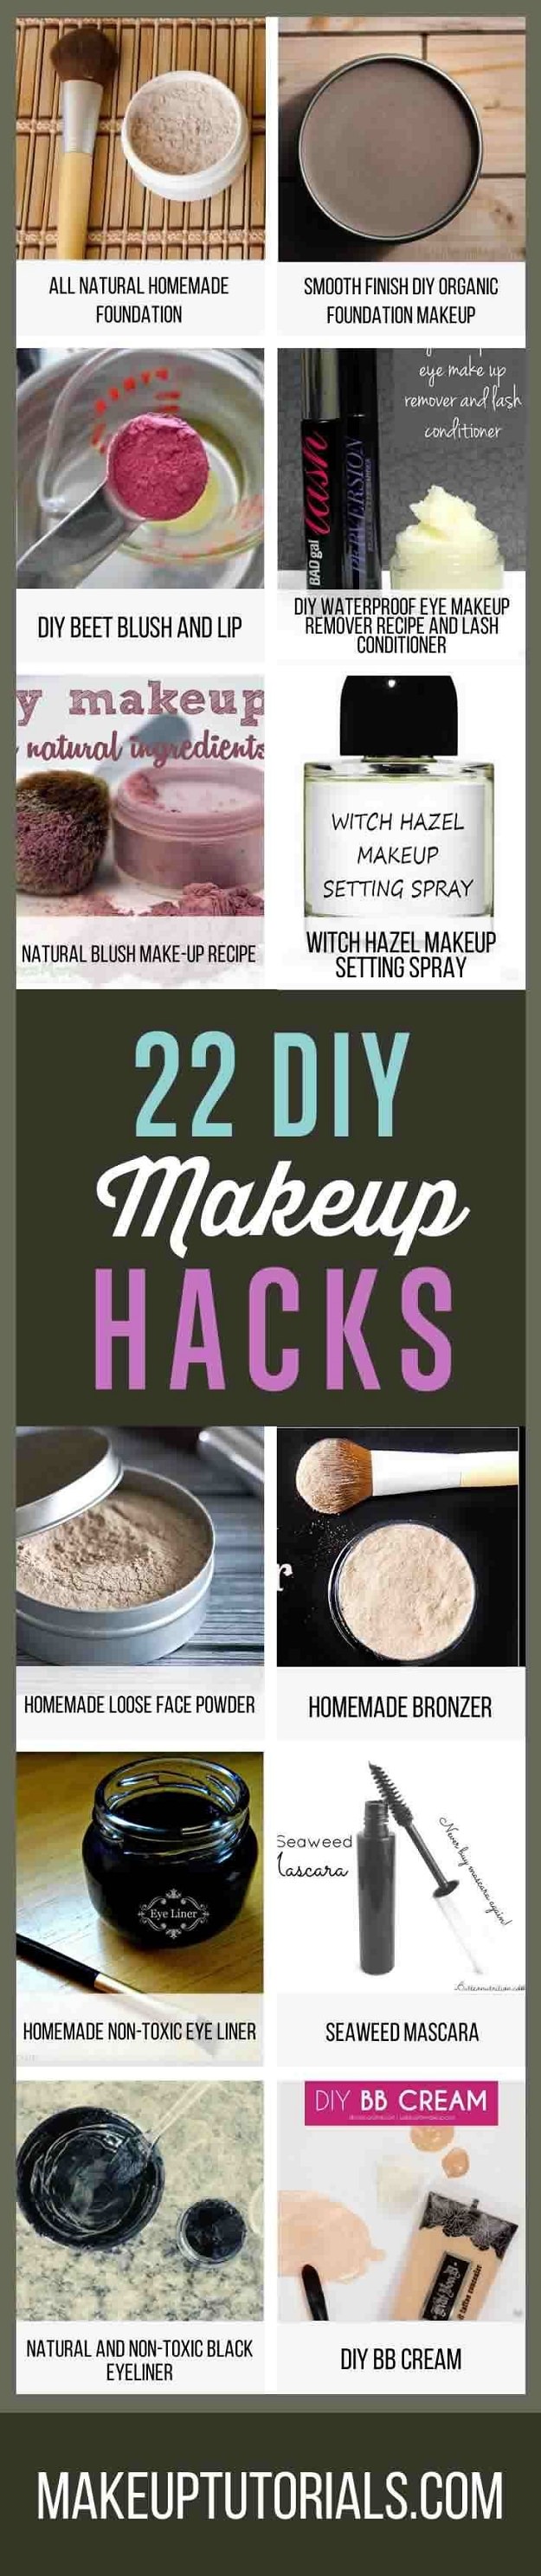 If you hate the chemicals in beauty products, try these DIY practical makeup recipes that you can easily make at home!